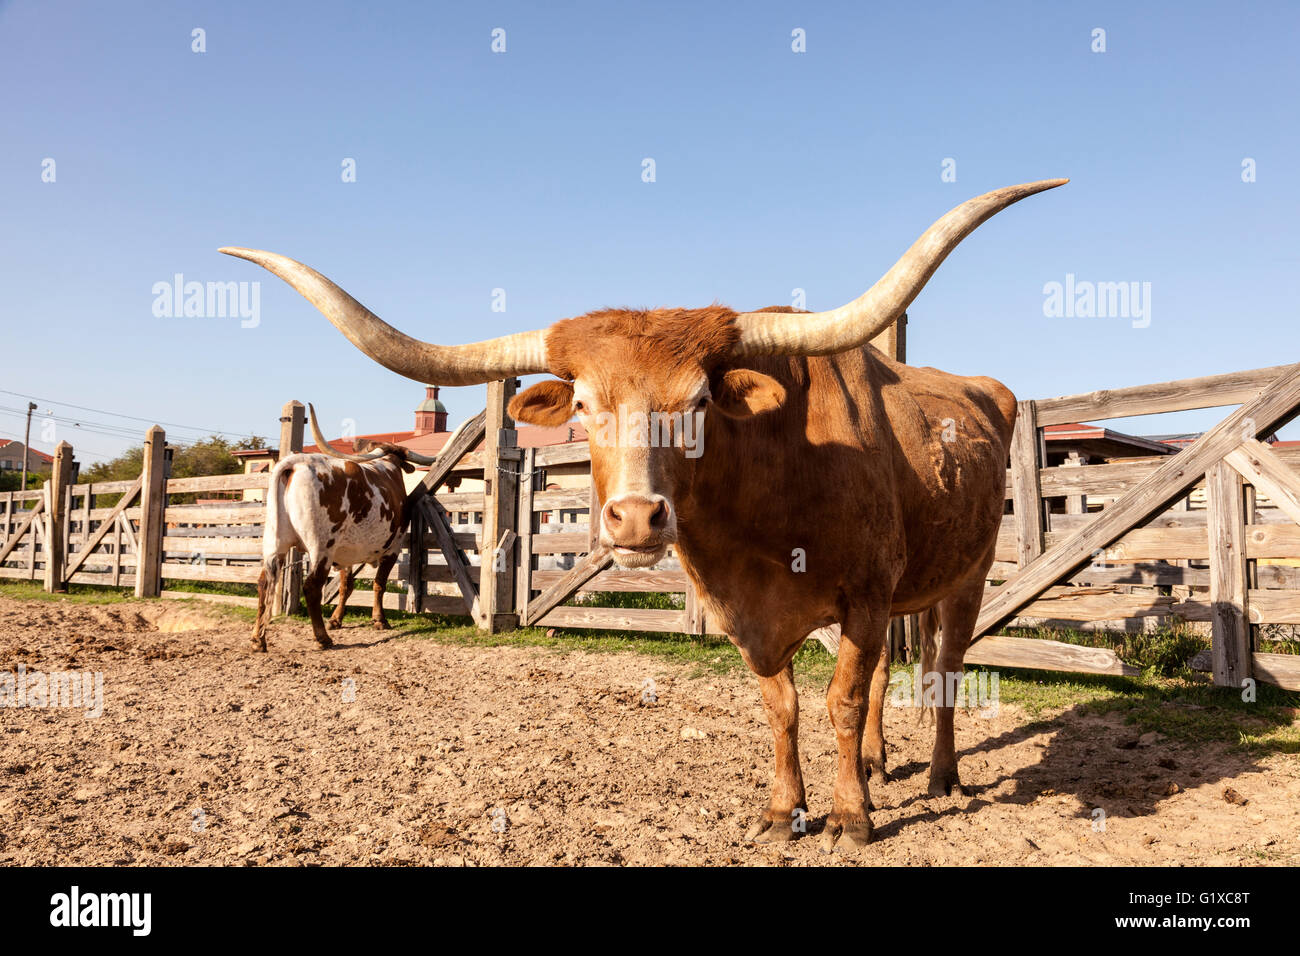 Longhorn steer in Fort Worth Stockyards. Texas, United States Stock Photo